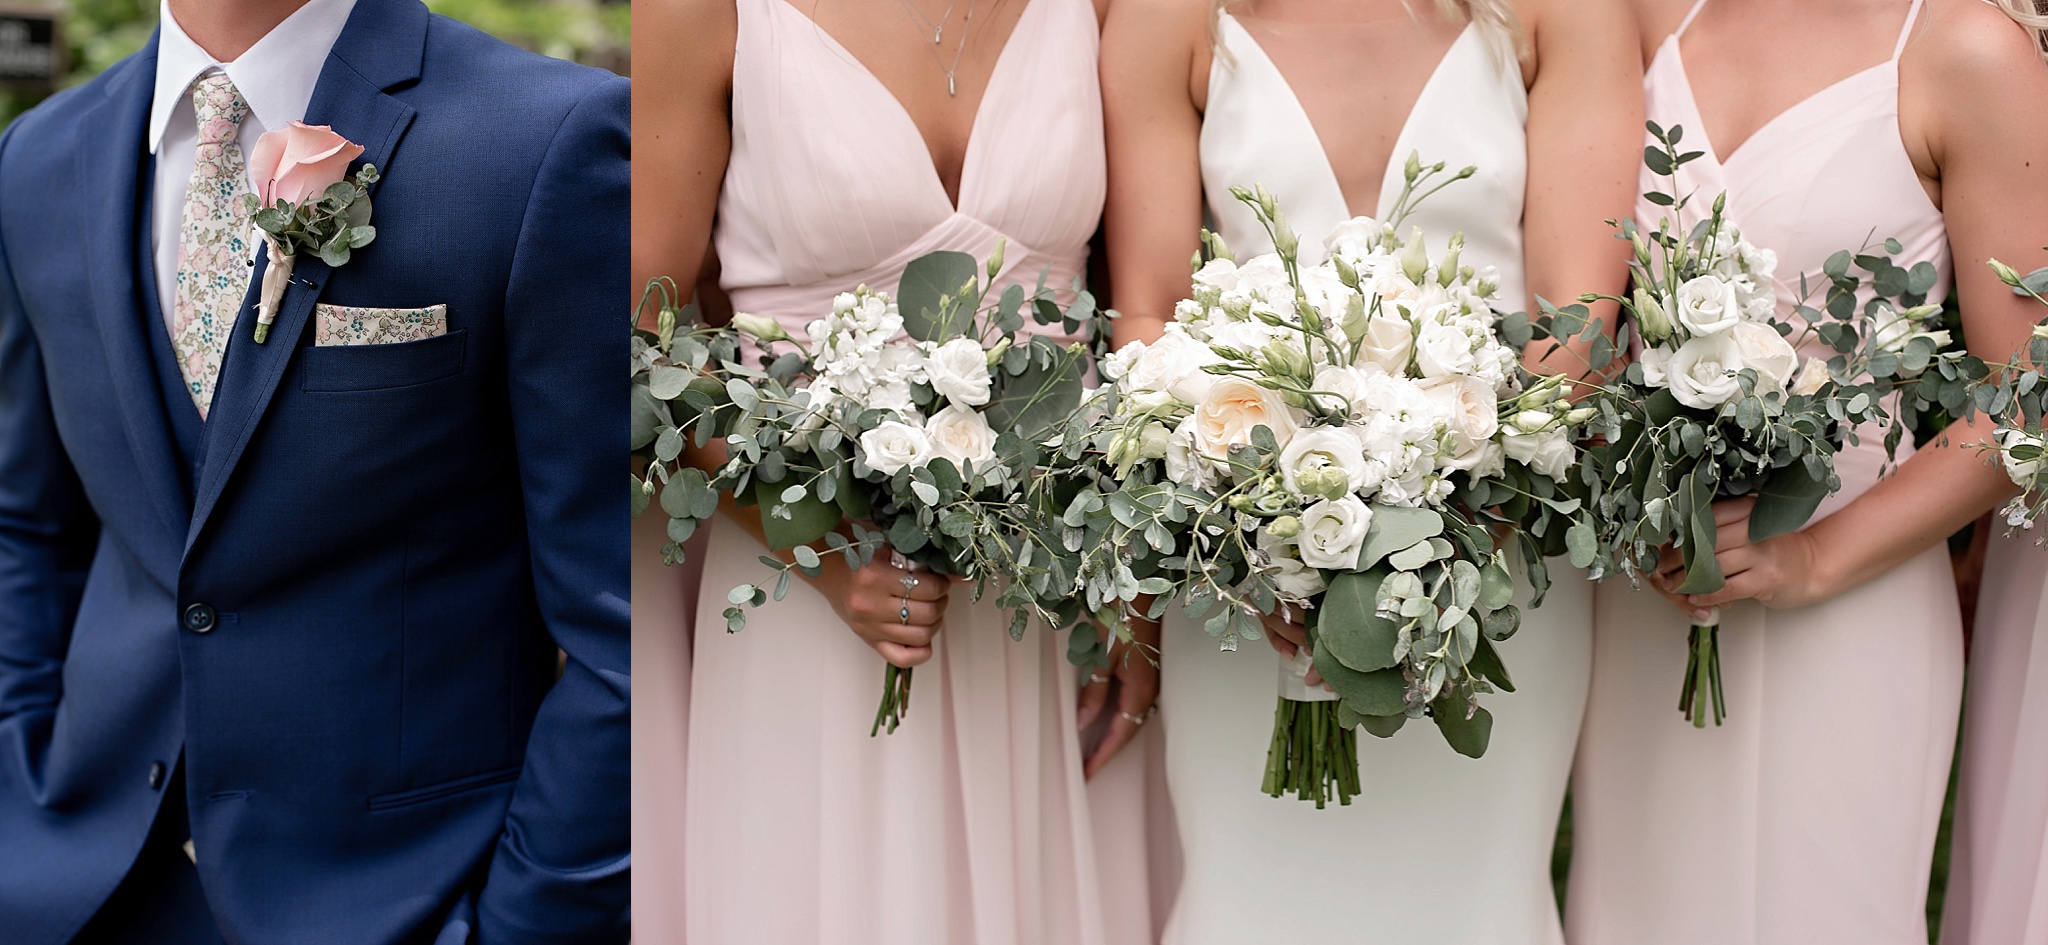 bridal details blush white and navy blue with white florals and eucalyptus greenery the flower mill sioux falls sd 